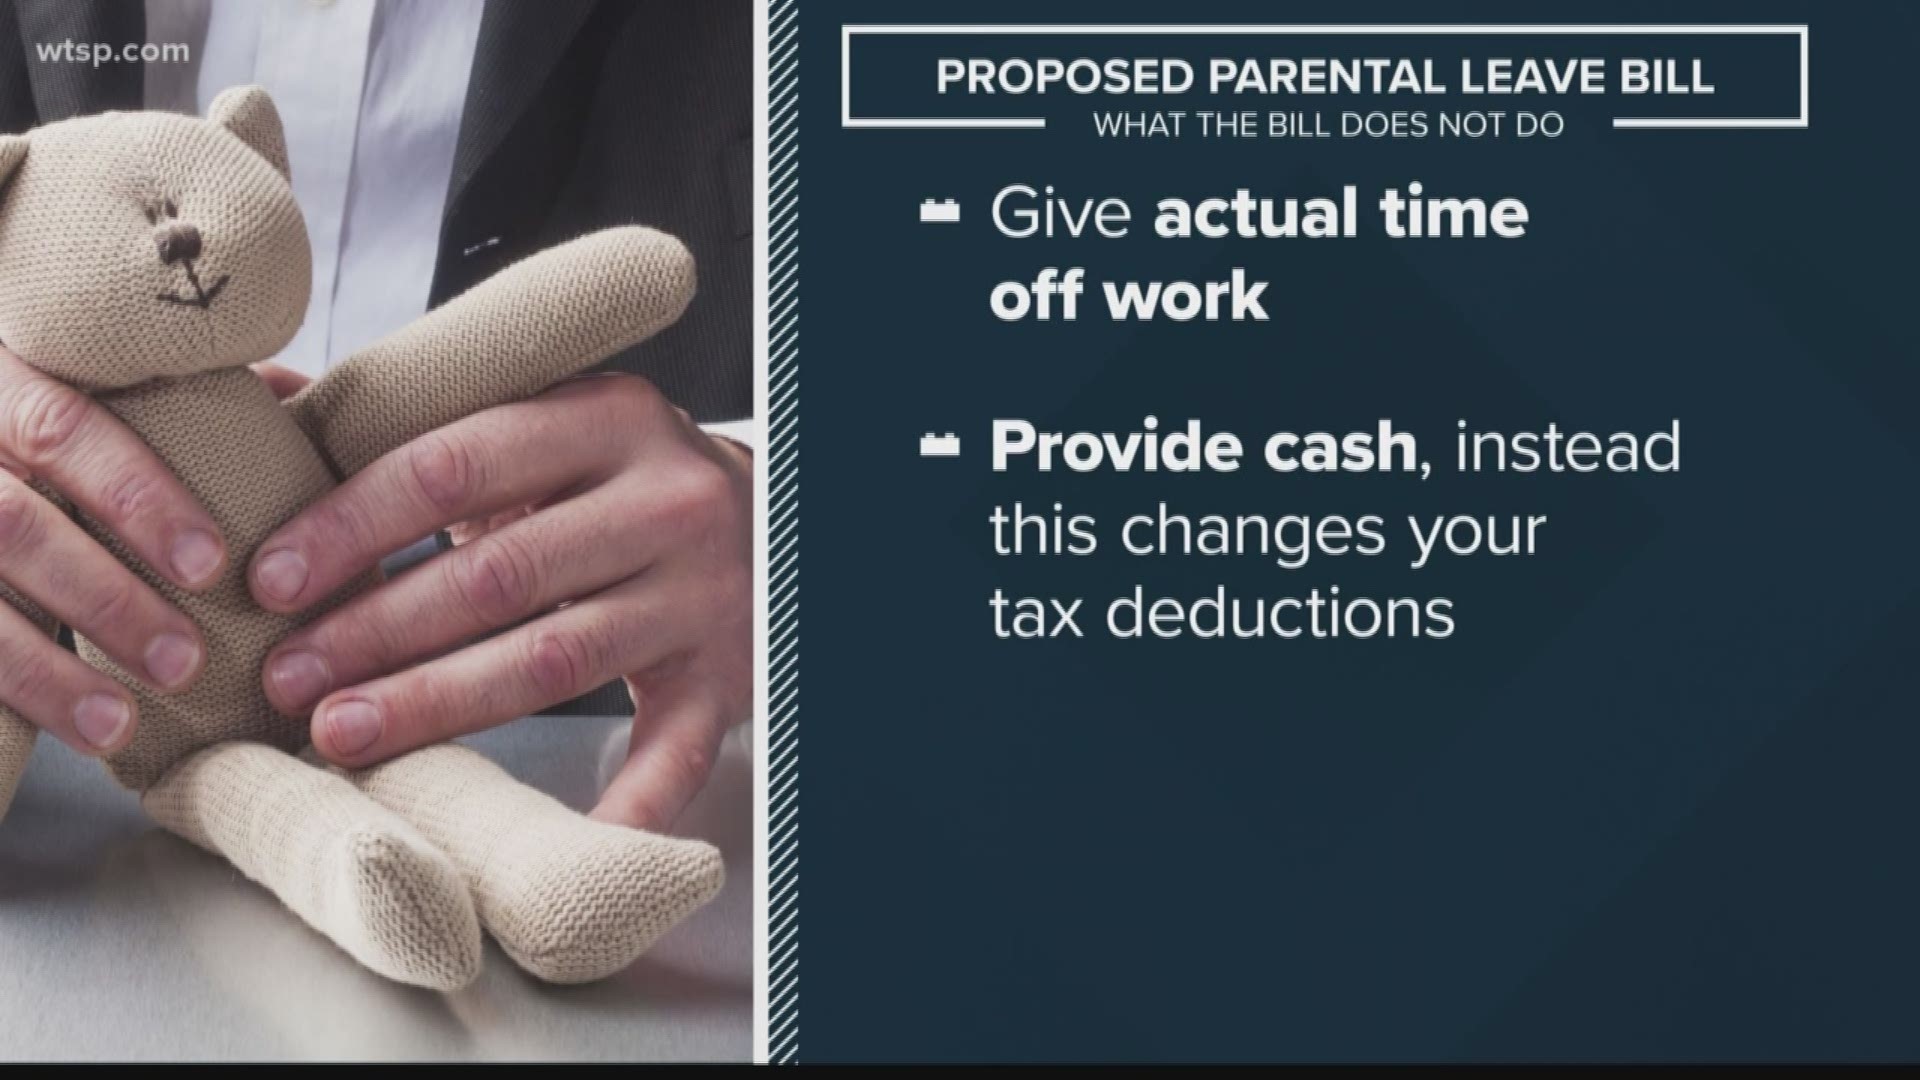 Republican Sen, Bill Cassidy of Louisiana and Democratic Sen. Kyrsten Sinema of Arizona came up with a plan that would change the tax code to give new parents access to more money to help relieve the burden of unpaid leave with a new child.

The proposal would allow new parents to take a $5,000 advance on their child tax credit. That would reduce the $2,000 annual benefit to $1,500 for the following 10 years after the birth or adoption.